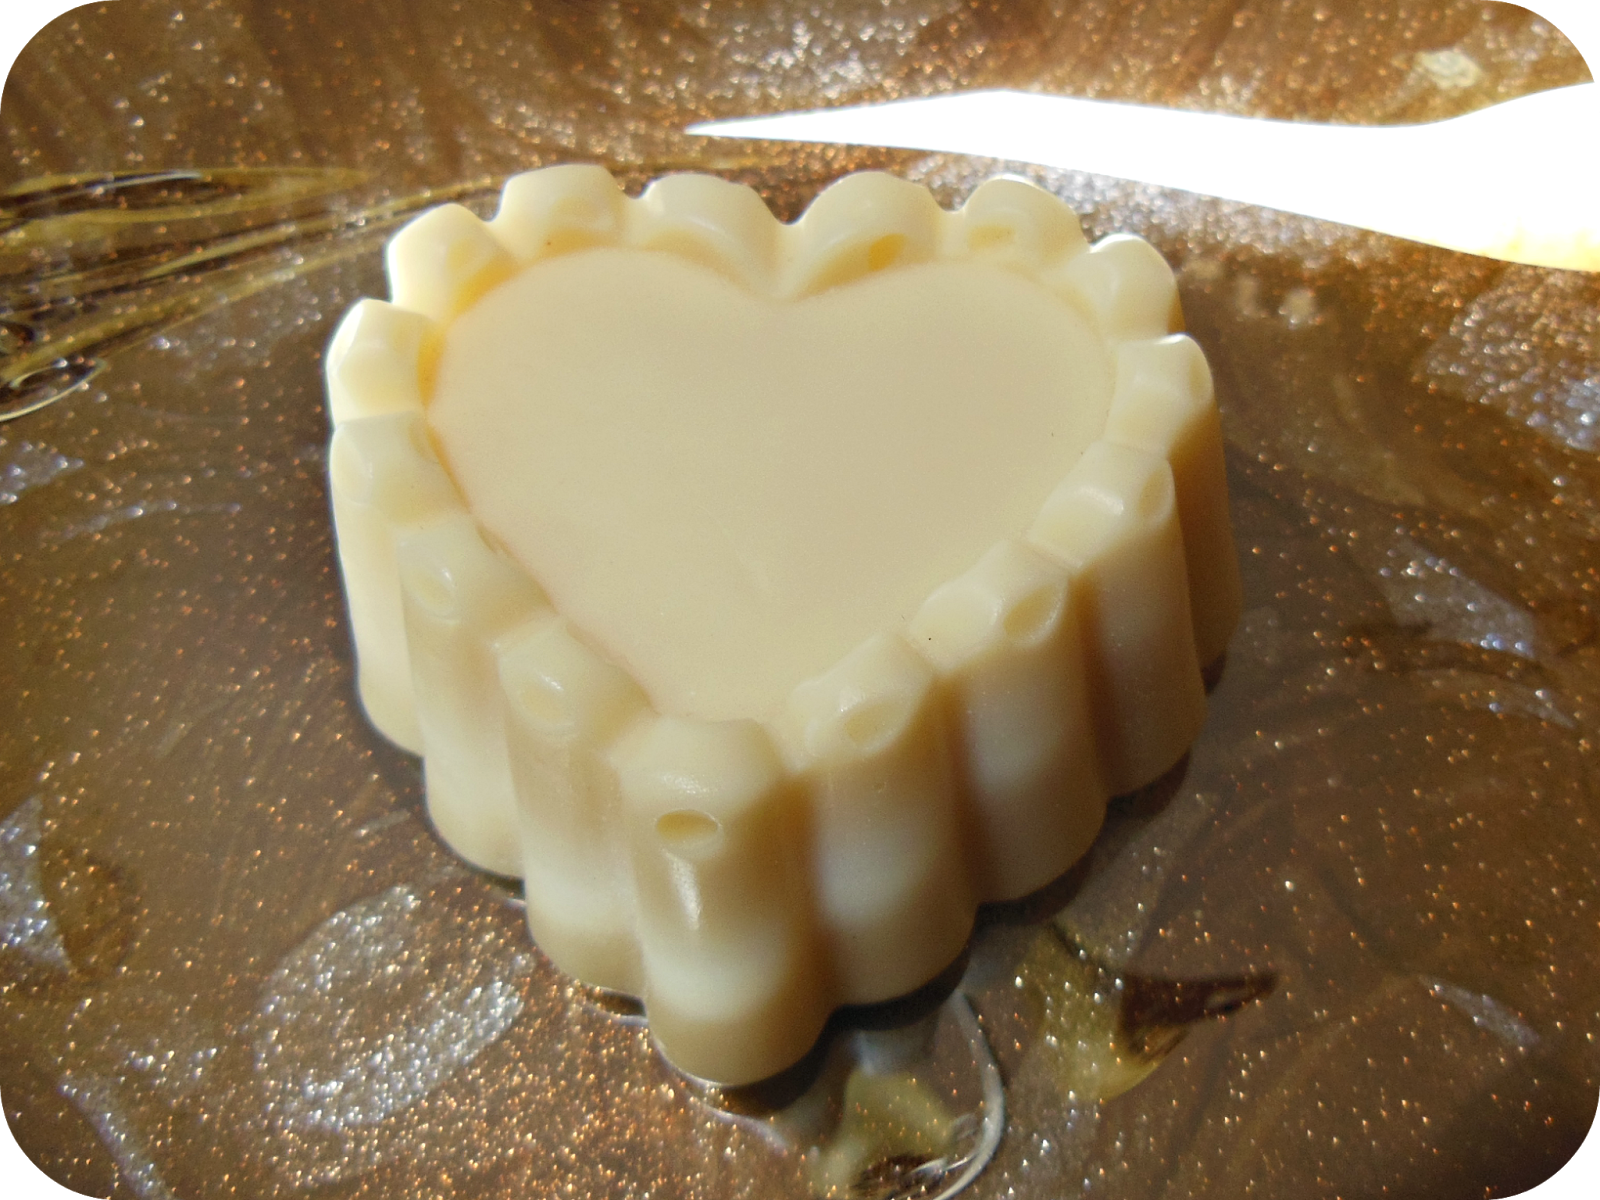 https://www.etsy.com/listing/185911268/heart-soaps?ref=shop_home_active_6